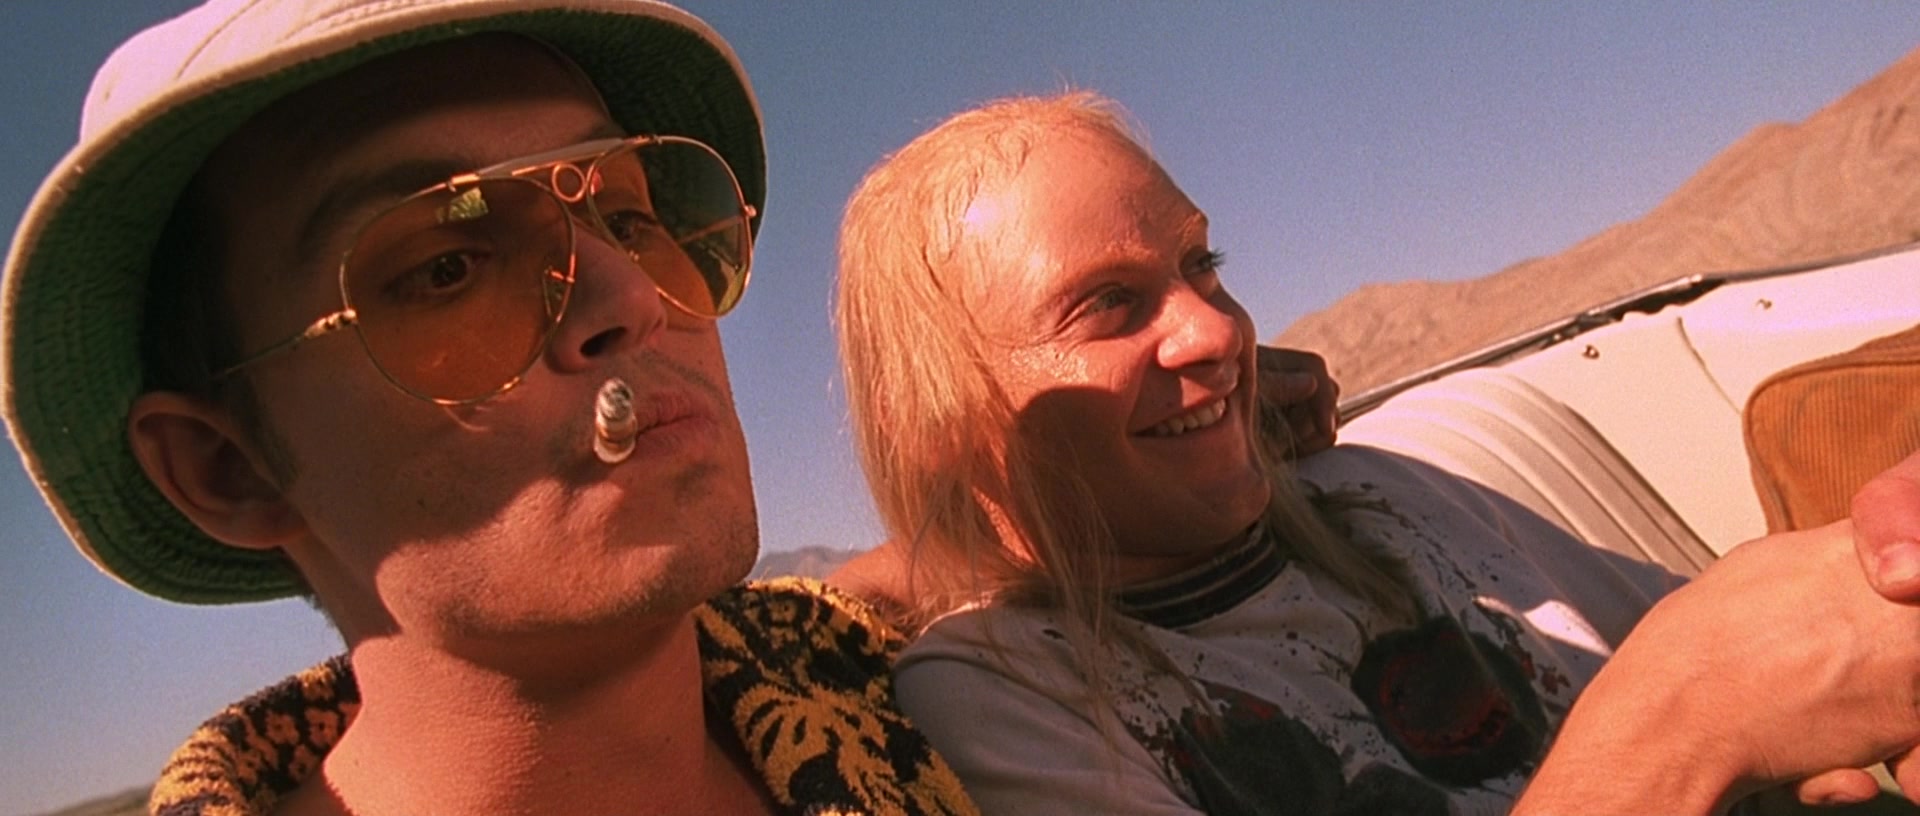 Ray-Ban Shooter RB3138 Aviator Sunglasses Worn by Johnny Depp in Fear and Loathing in ...1920 x 816